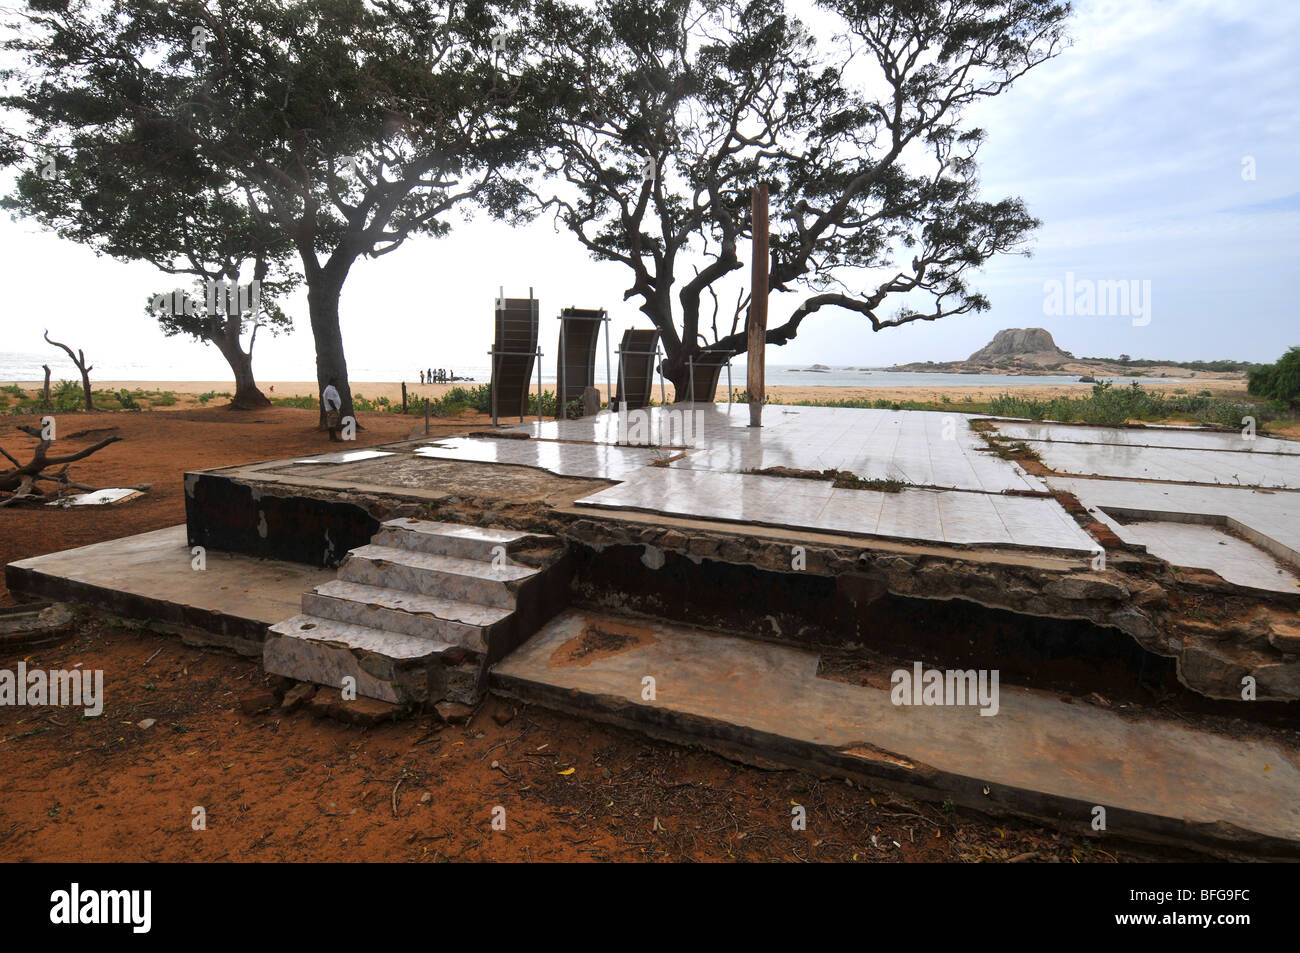 The remaining foundations of buildings, caused by the 2004 tsunami, by the beach at Yala National Park in Sri Lanka Stock Photo